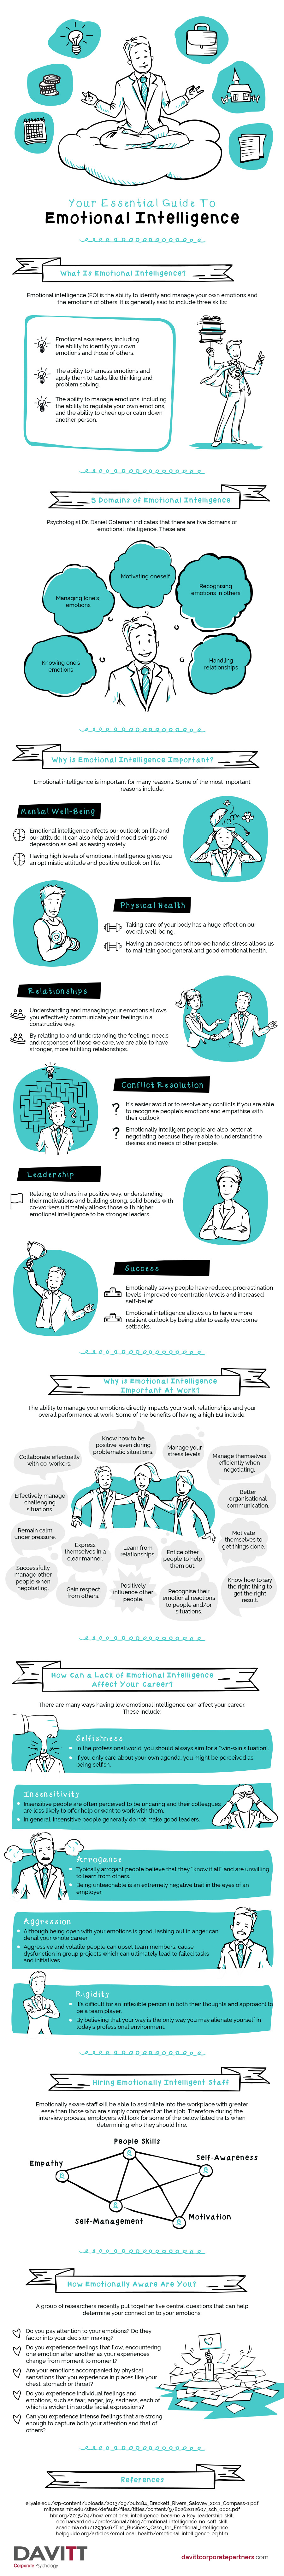 emotional-intelligence-what-you-need-to-know-infographic